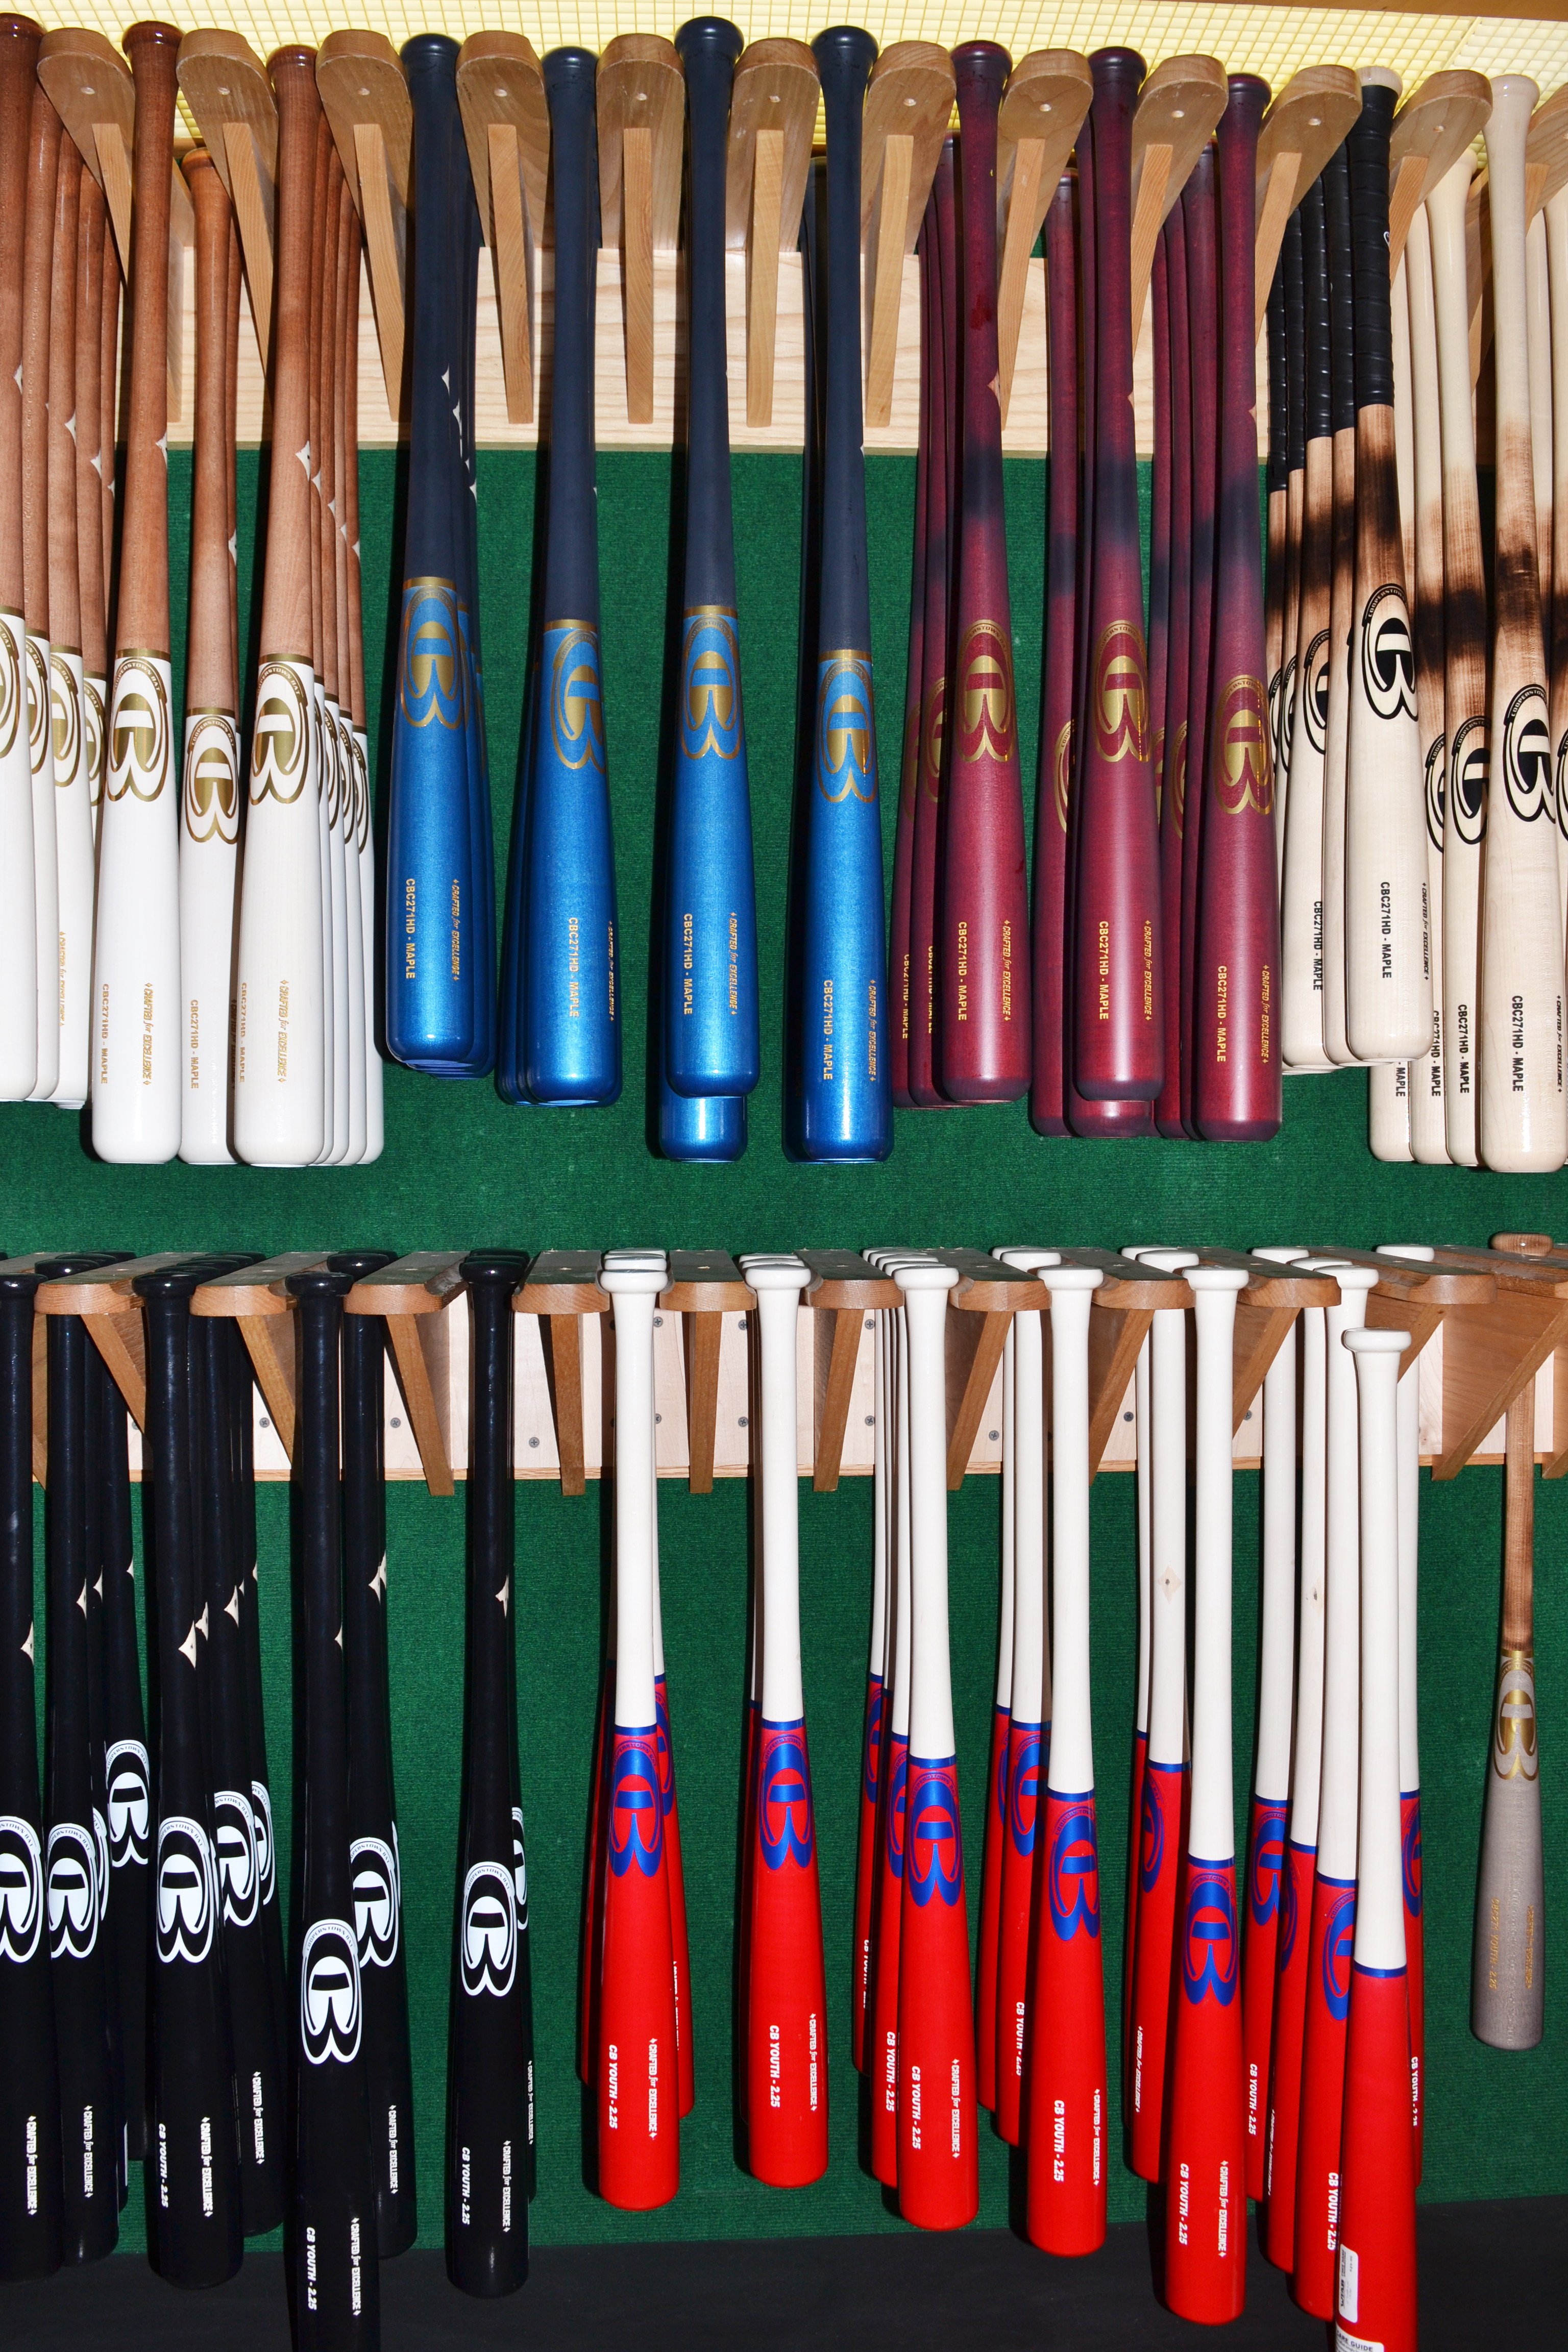 You can get a personalized engraved bat at the Cooperstown Bat Company.